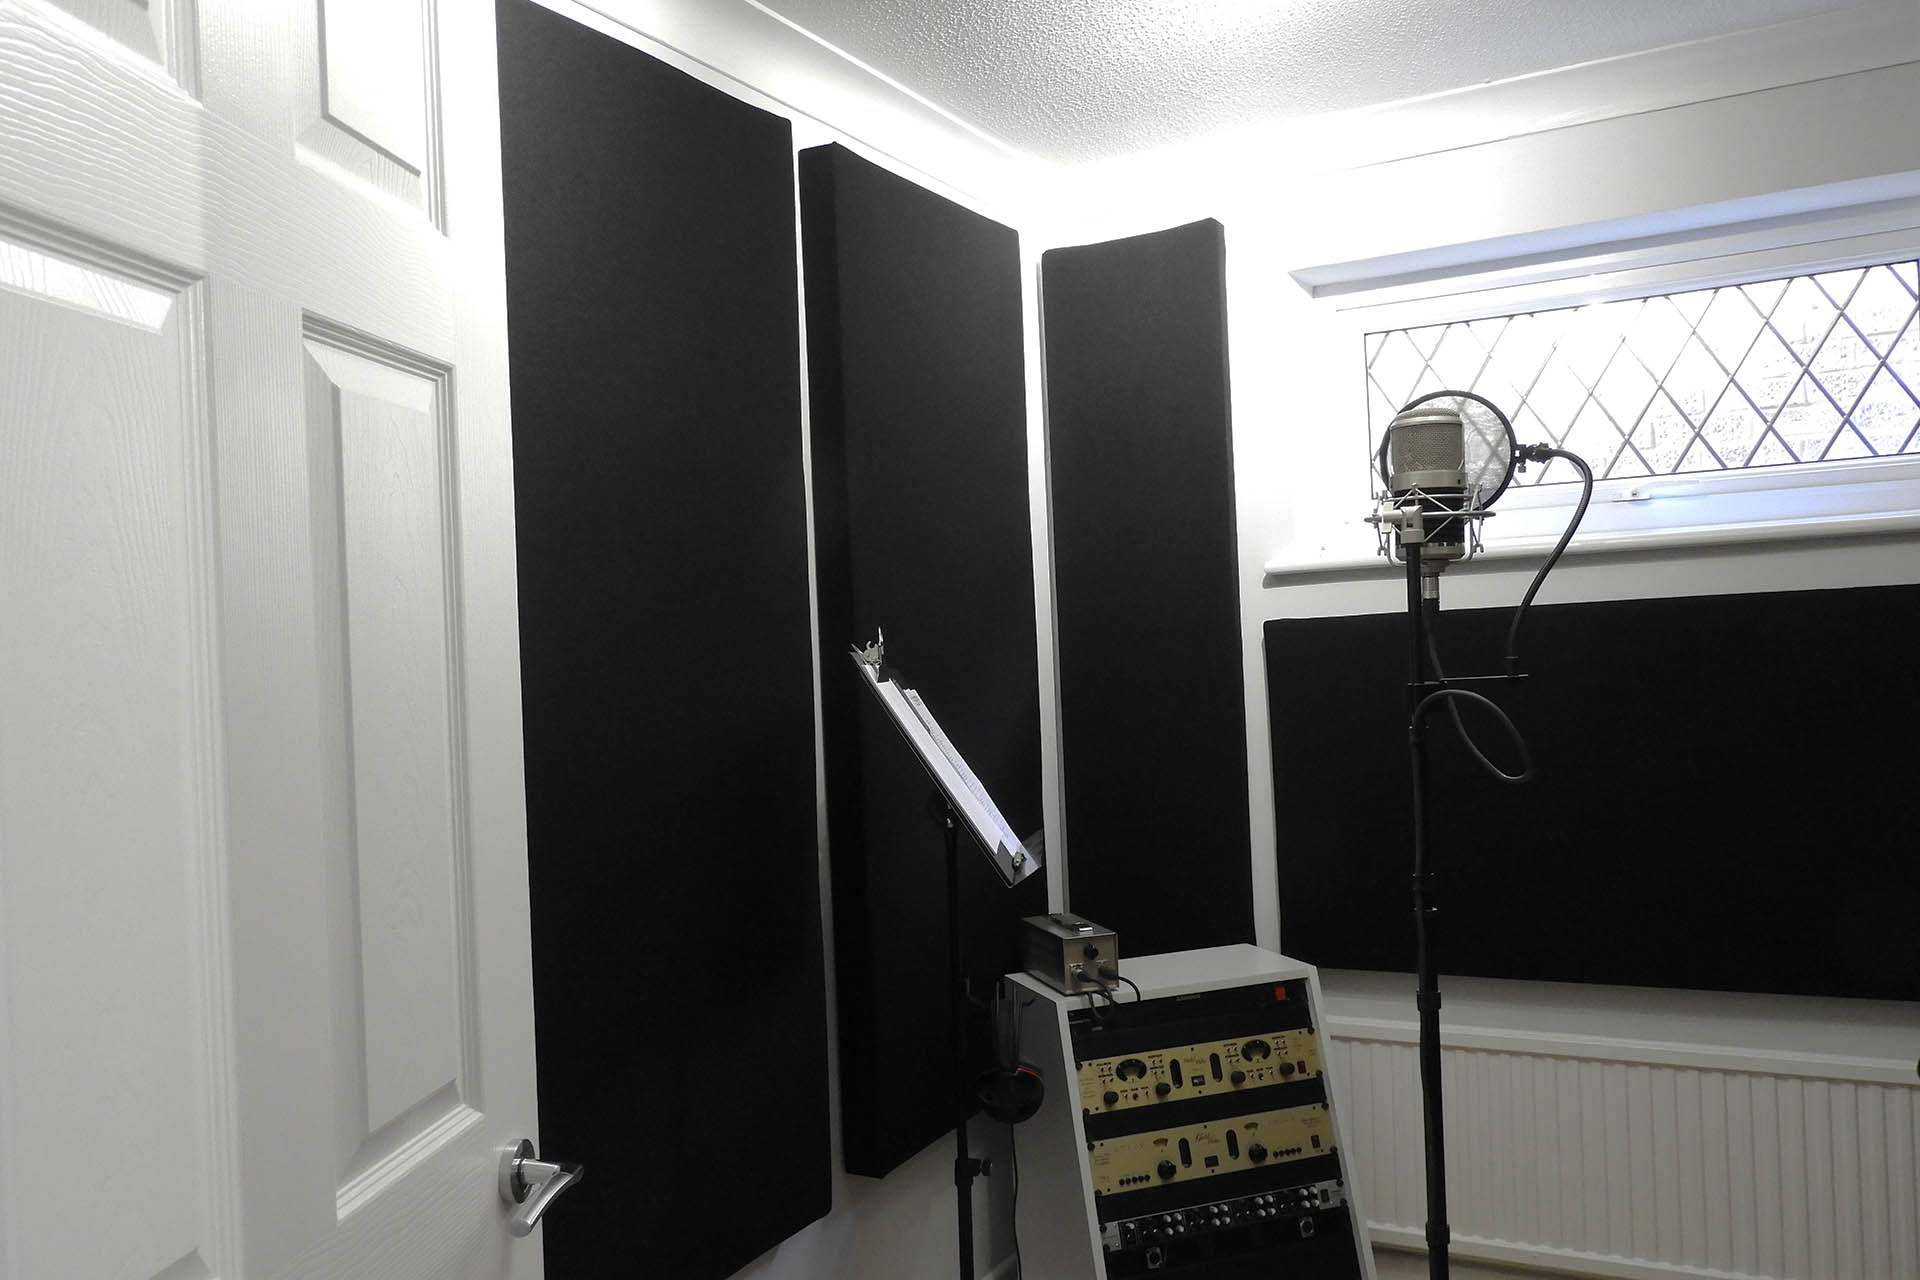 DIY acoustic panels finished and installed on stud wall in mic. room